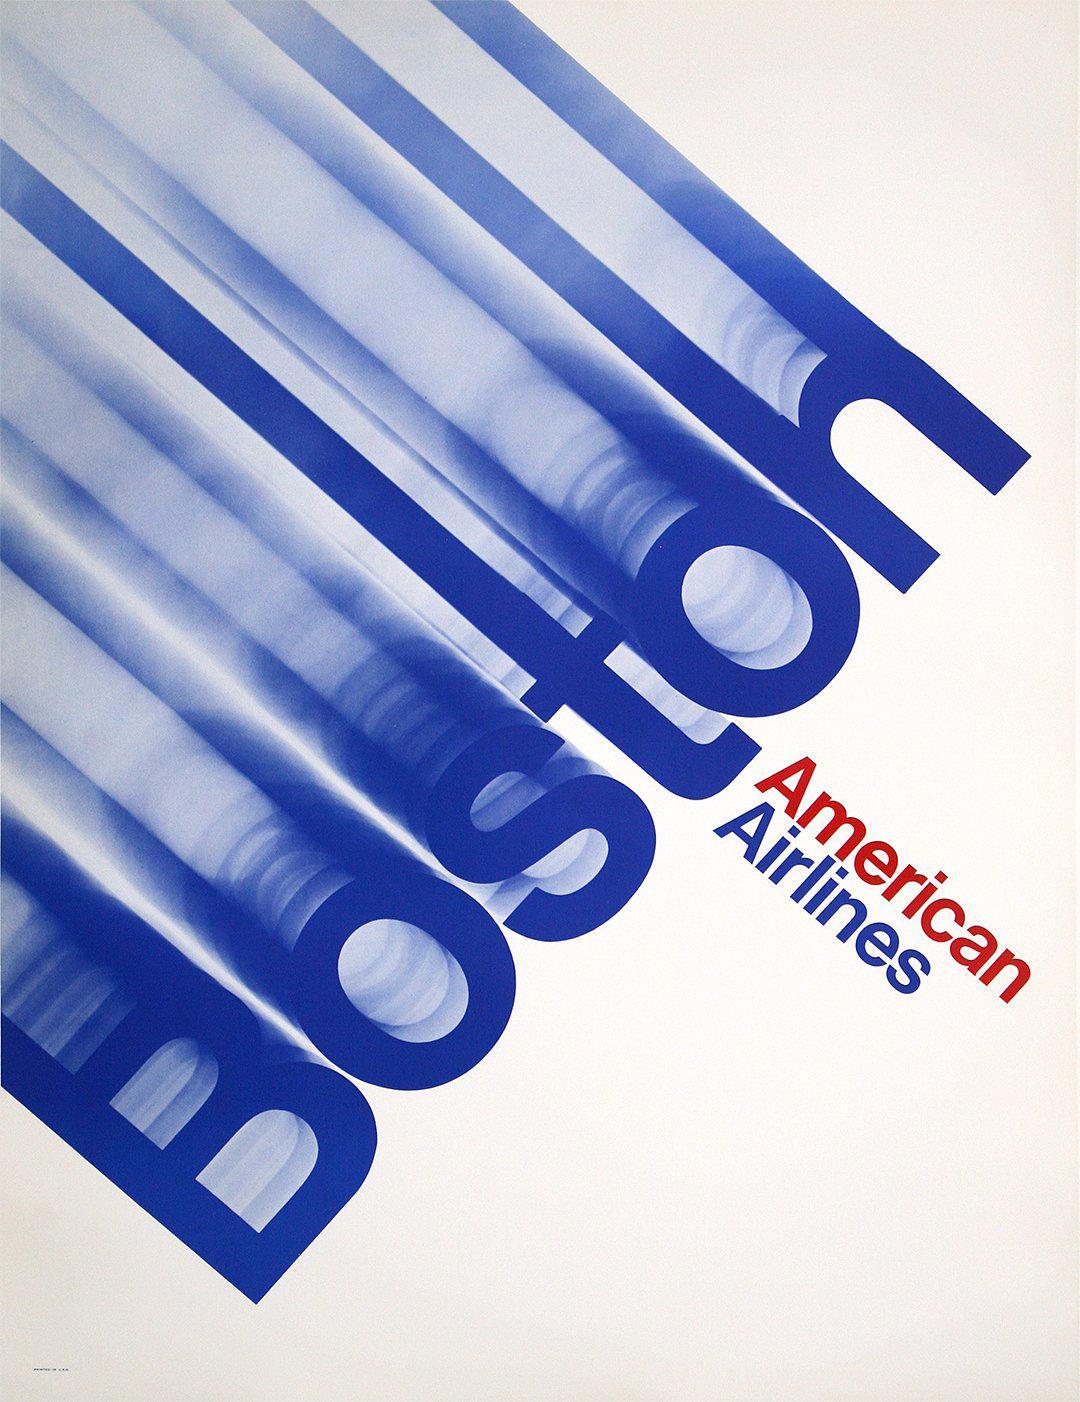 Original Vintage American Airlines to Boston Poster c1970 Text